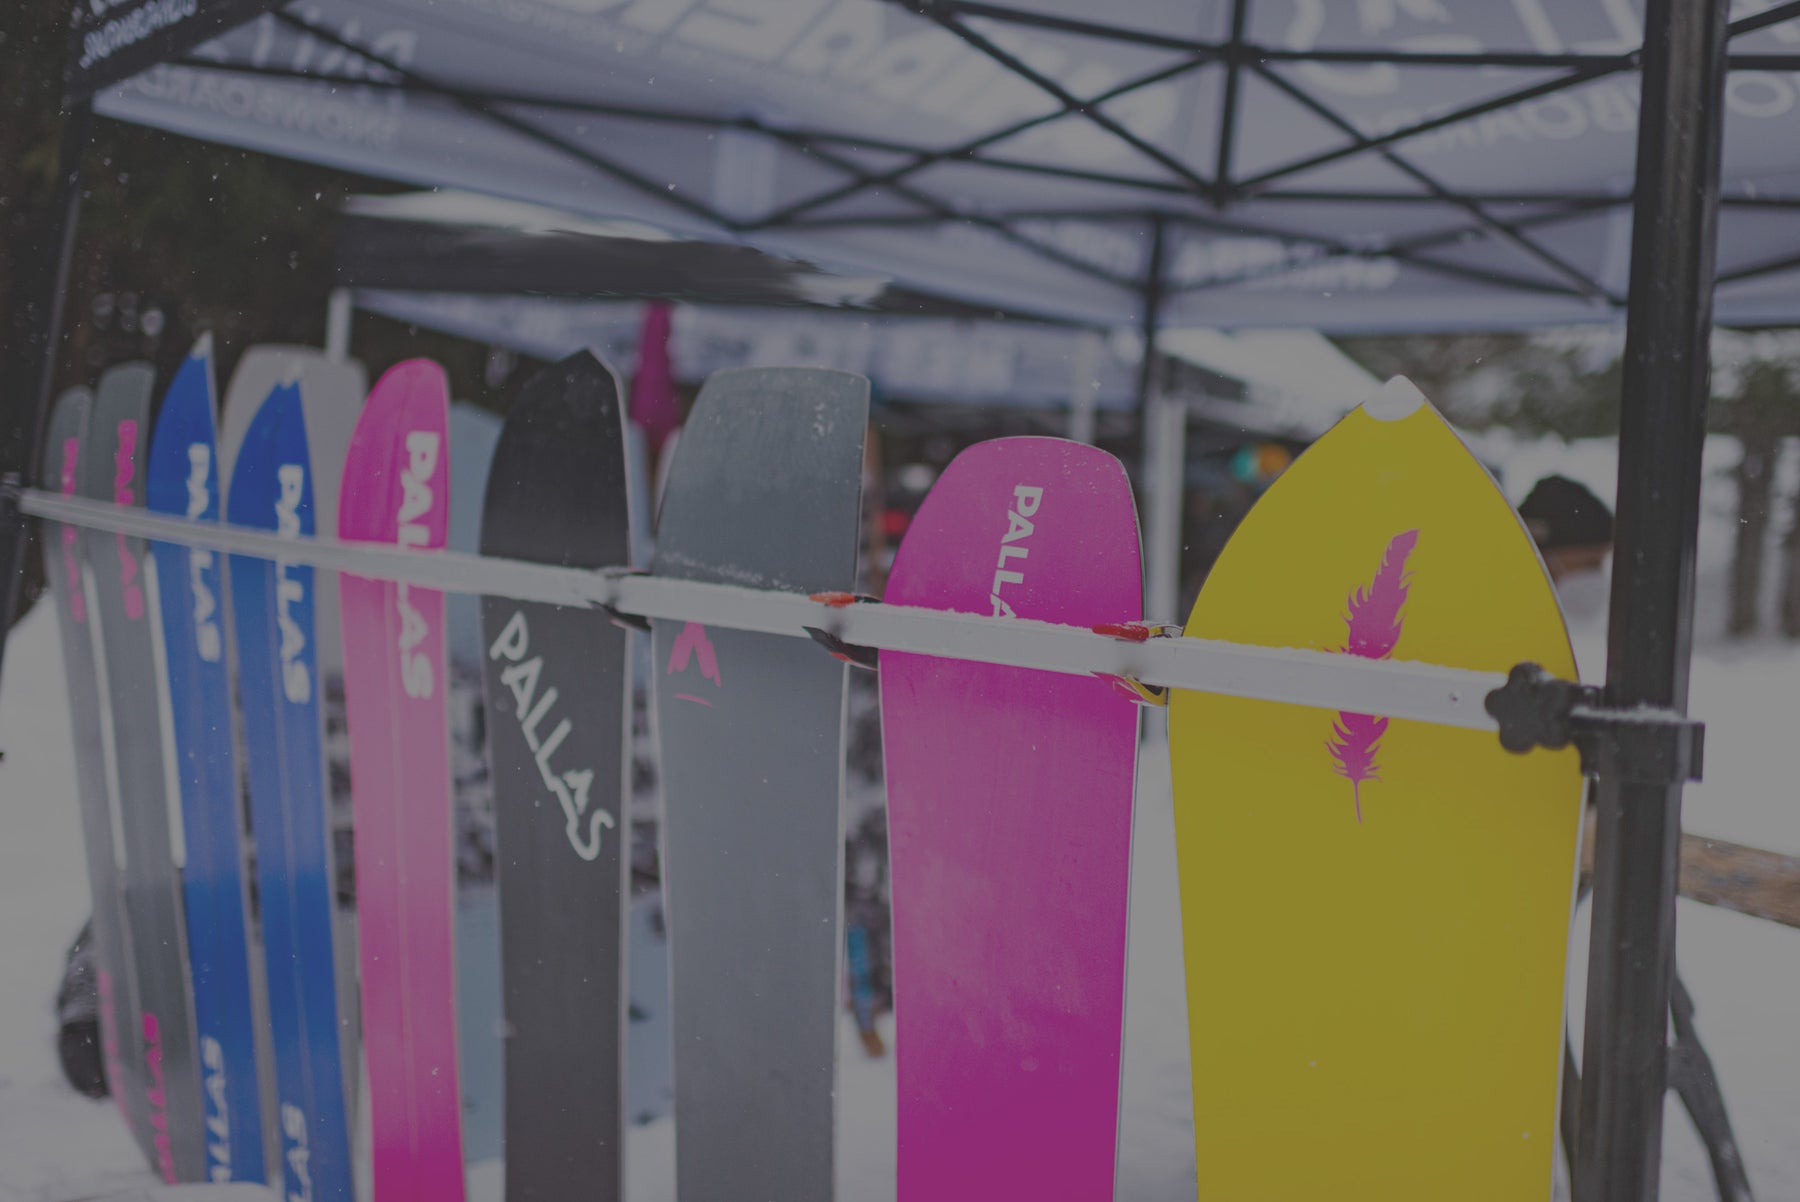 Image of a row of Pallas snowboards displayed under a tent at an on-snow demo event at a ski area. The bases are bright and colorful and show multiple versions of the Pallas logo.